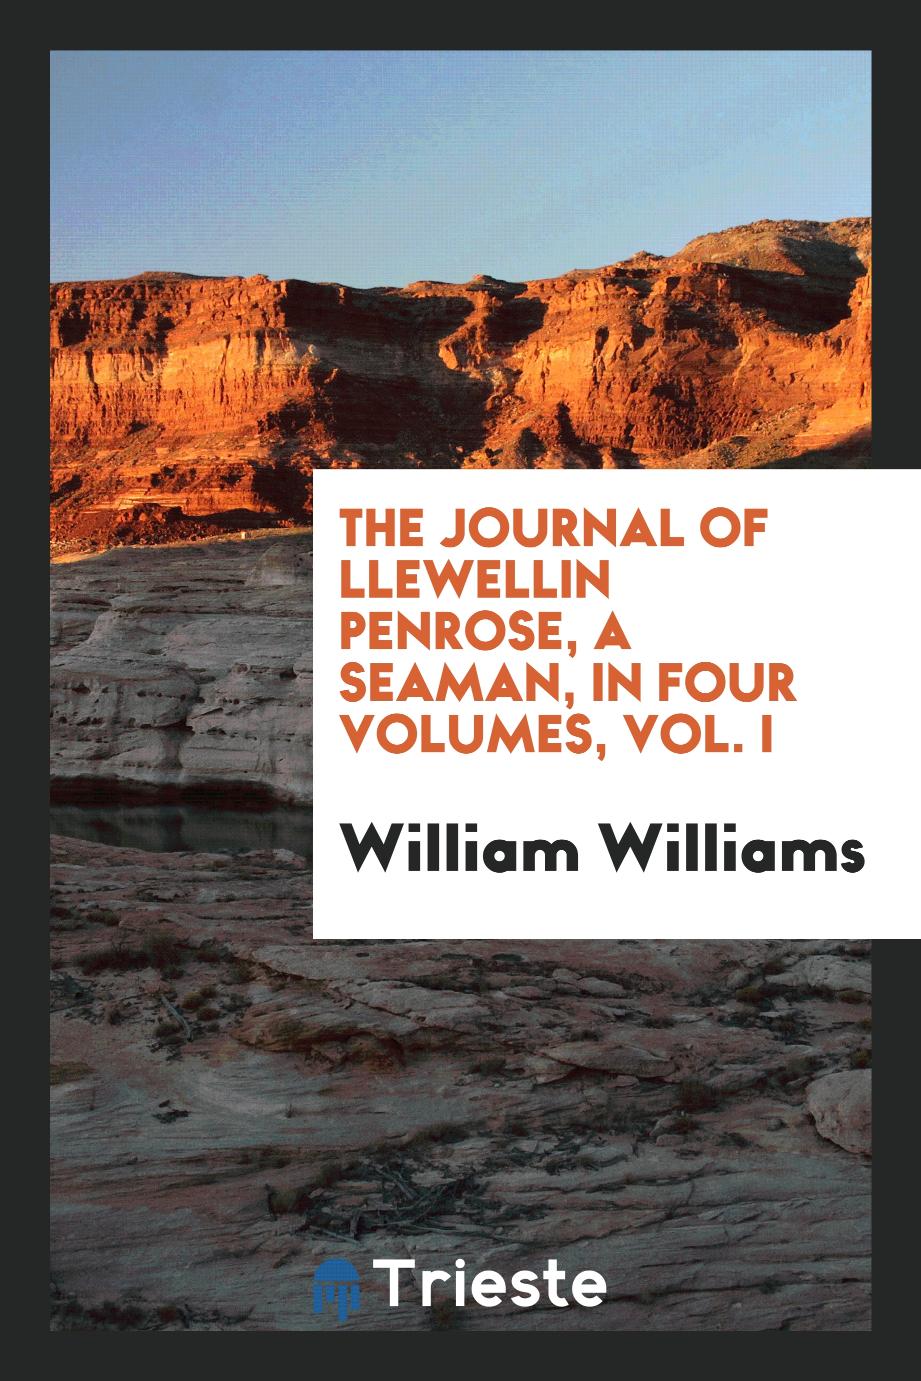 The journal of Llewellin Penrose, a seaman, In four volumes, Vol. I